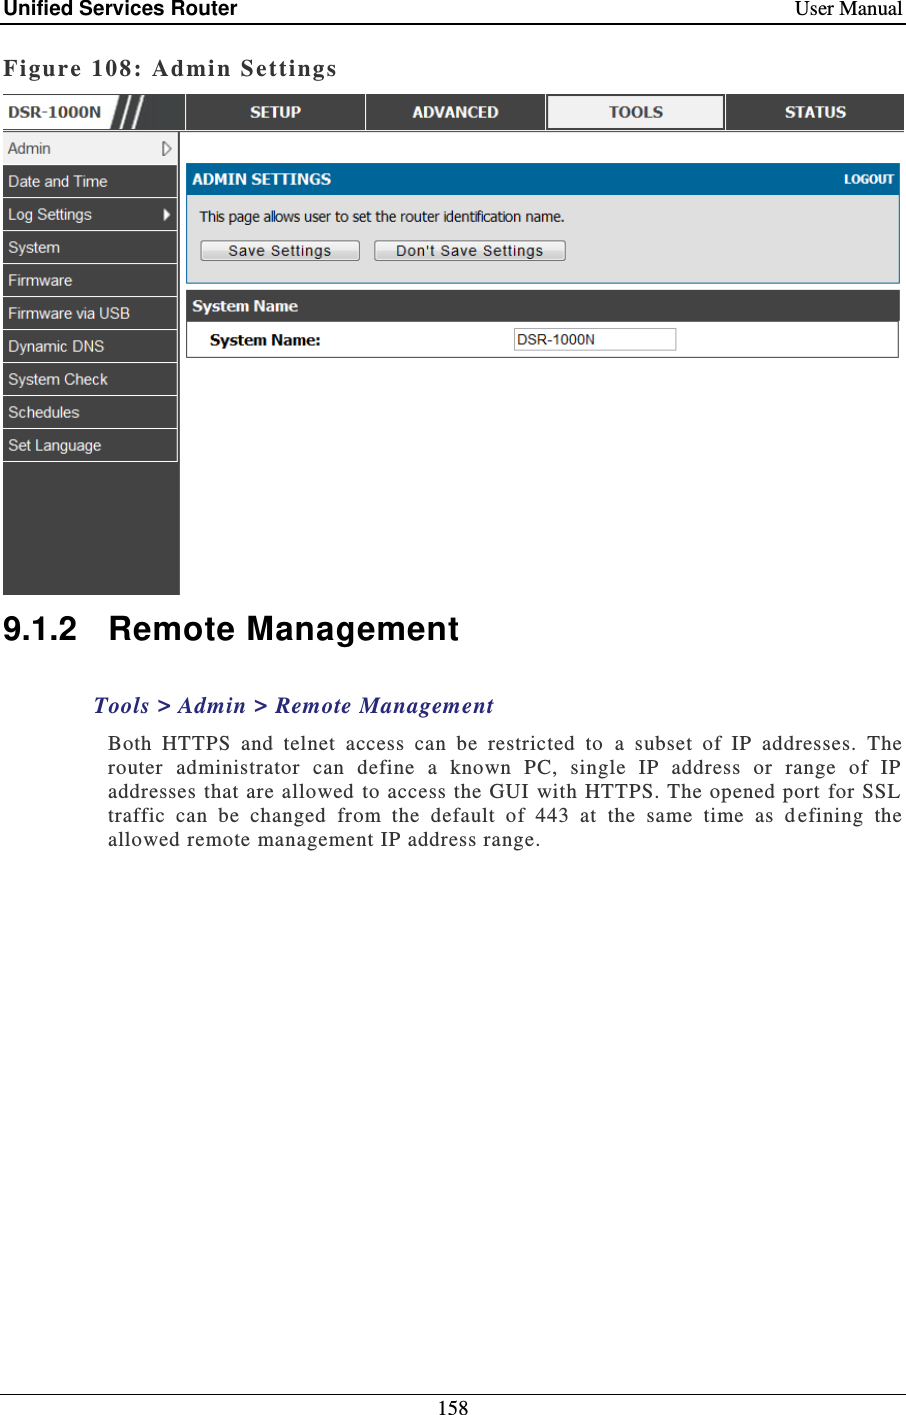 Unified Services Router    User Manual 158  Figure 108: Admin Settings  9.1.2  Remote Management Tools &gt; Admin &gt; Remote Management  Both  HTTPS  and  telnet  access  can  be  restricted  to  a  subset  of  IP  addresses.  The router  administrator  can  define  a  known  PC,  single  IP  address  or  range  of  IP addresses that are allowed  to access the GUI with HTTPS. The opened port  for SSL traffic  can  be  changed  from  the  default  of  443  at  the  same  time  as  d efining  the allowed remote management IP address range.  